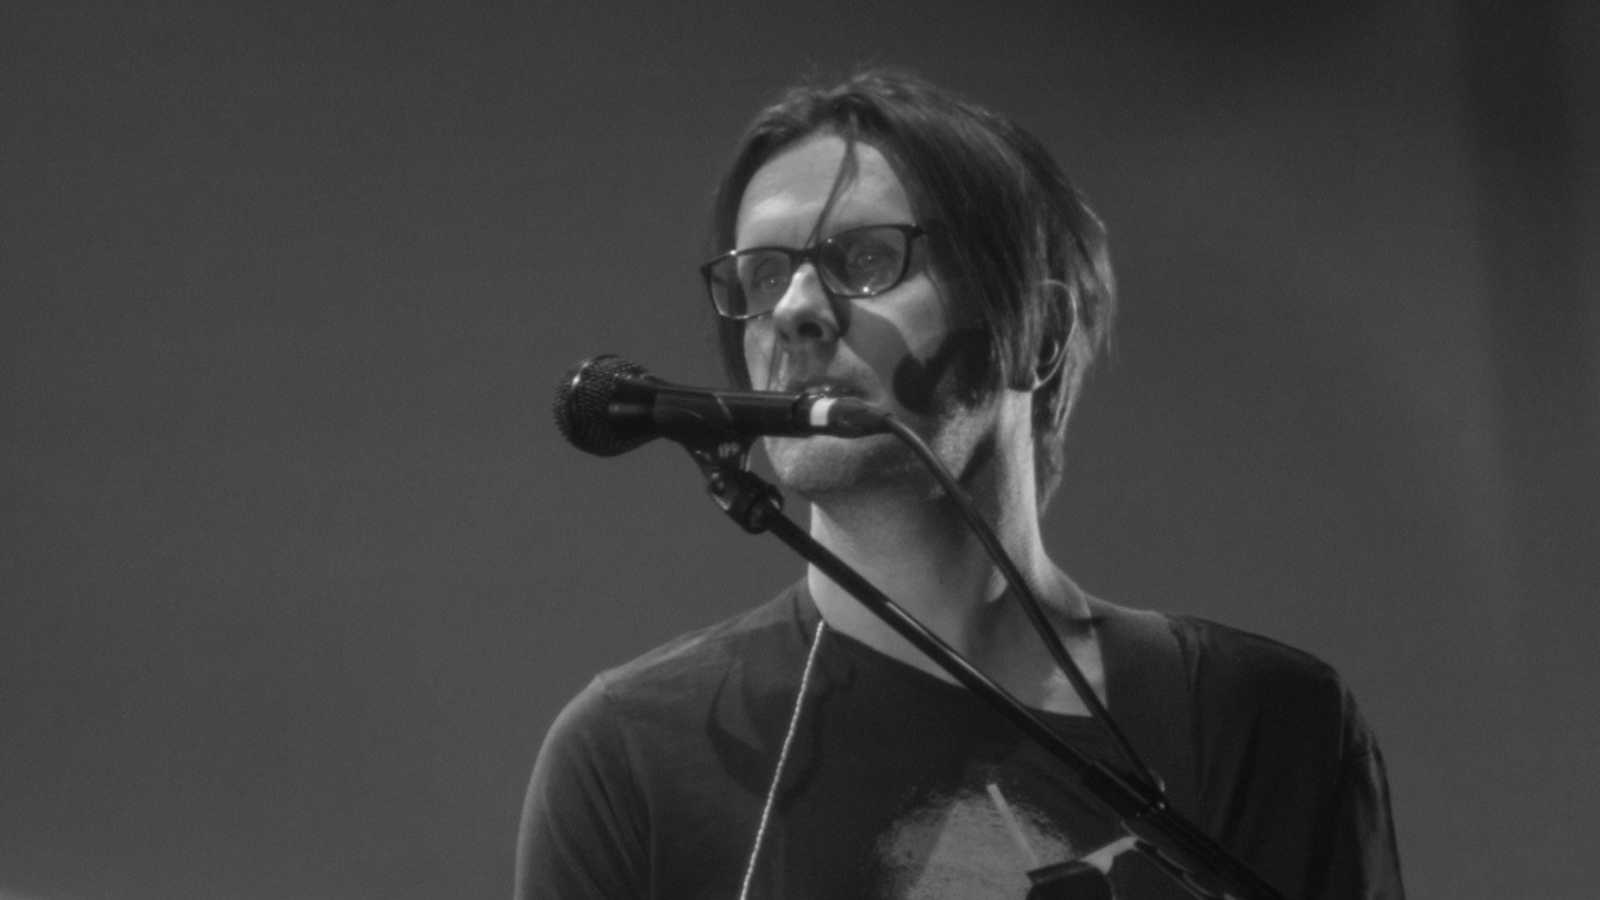 Bologna 13 February 2019 - Steven Wilson play on the stage of the Teatro Manzoni of Bologna